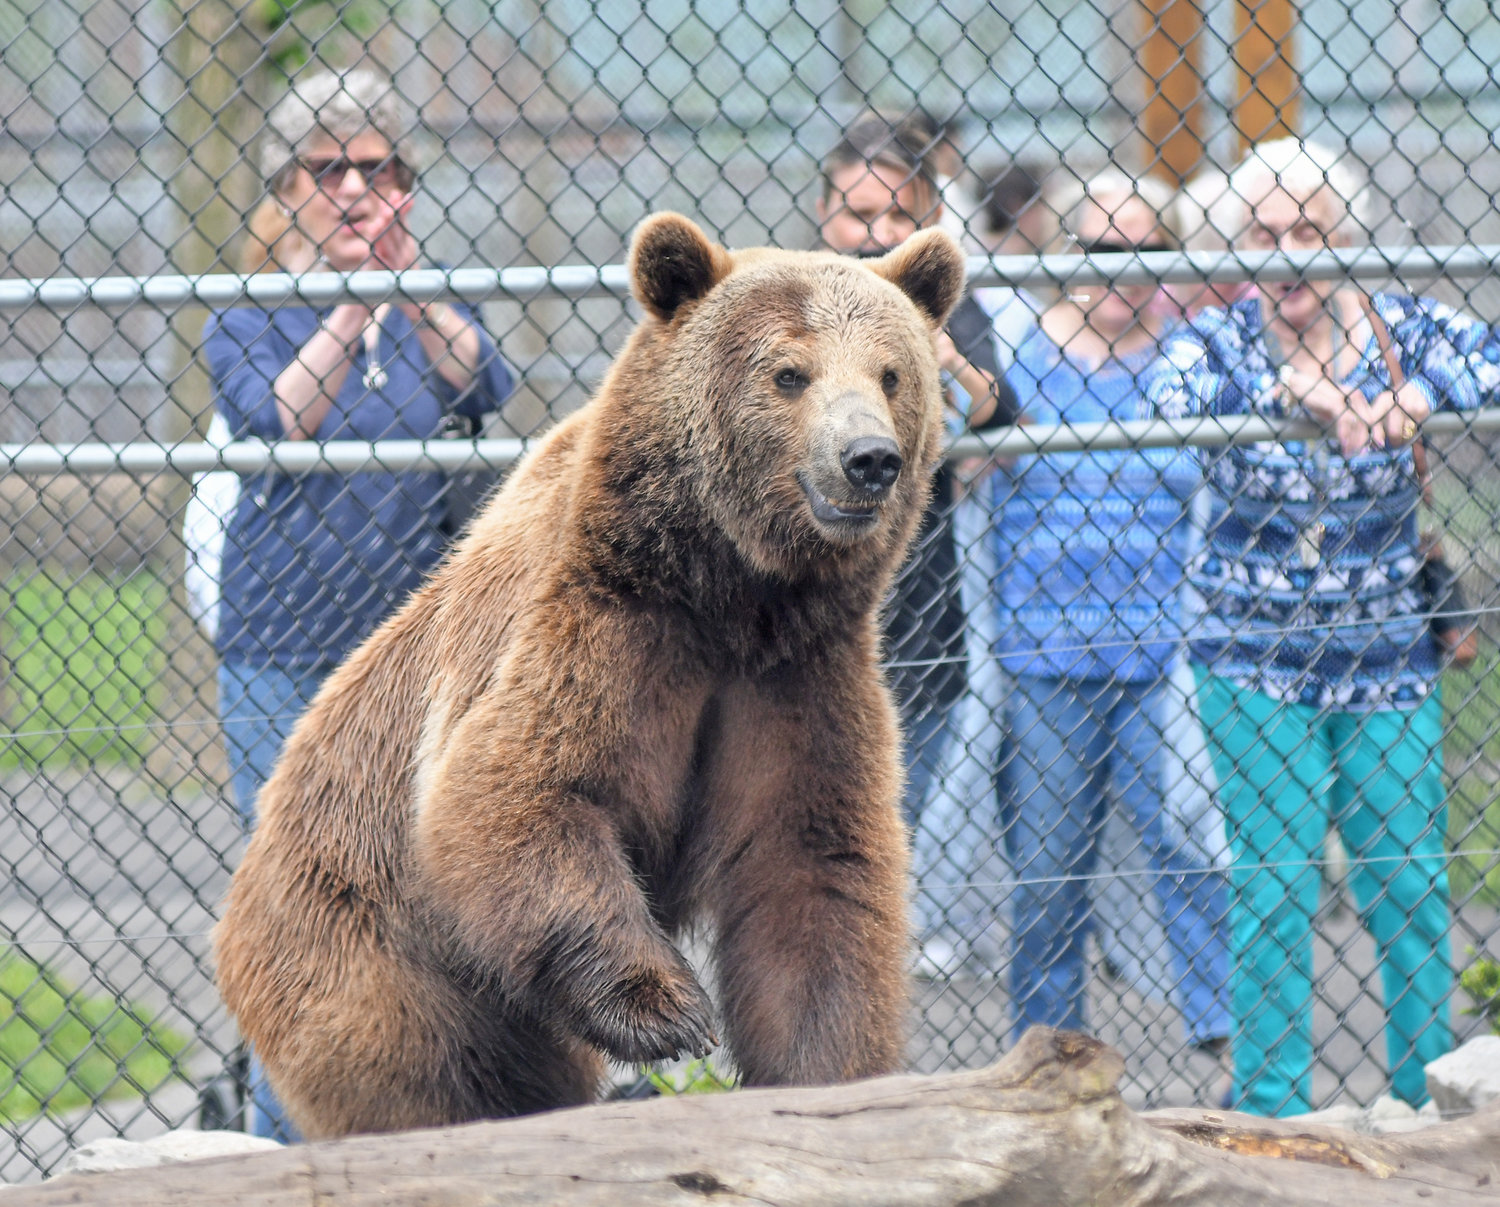 Area animal park owners hope for speedy return of 'wild' times | Daily  Sentinel